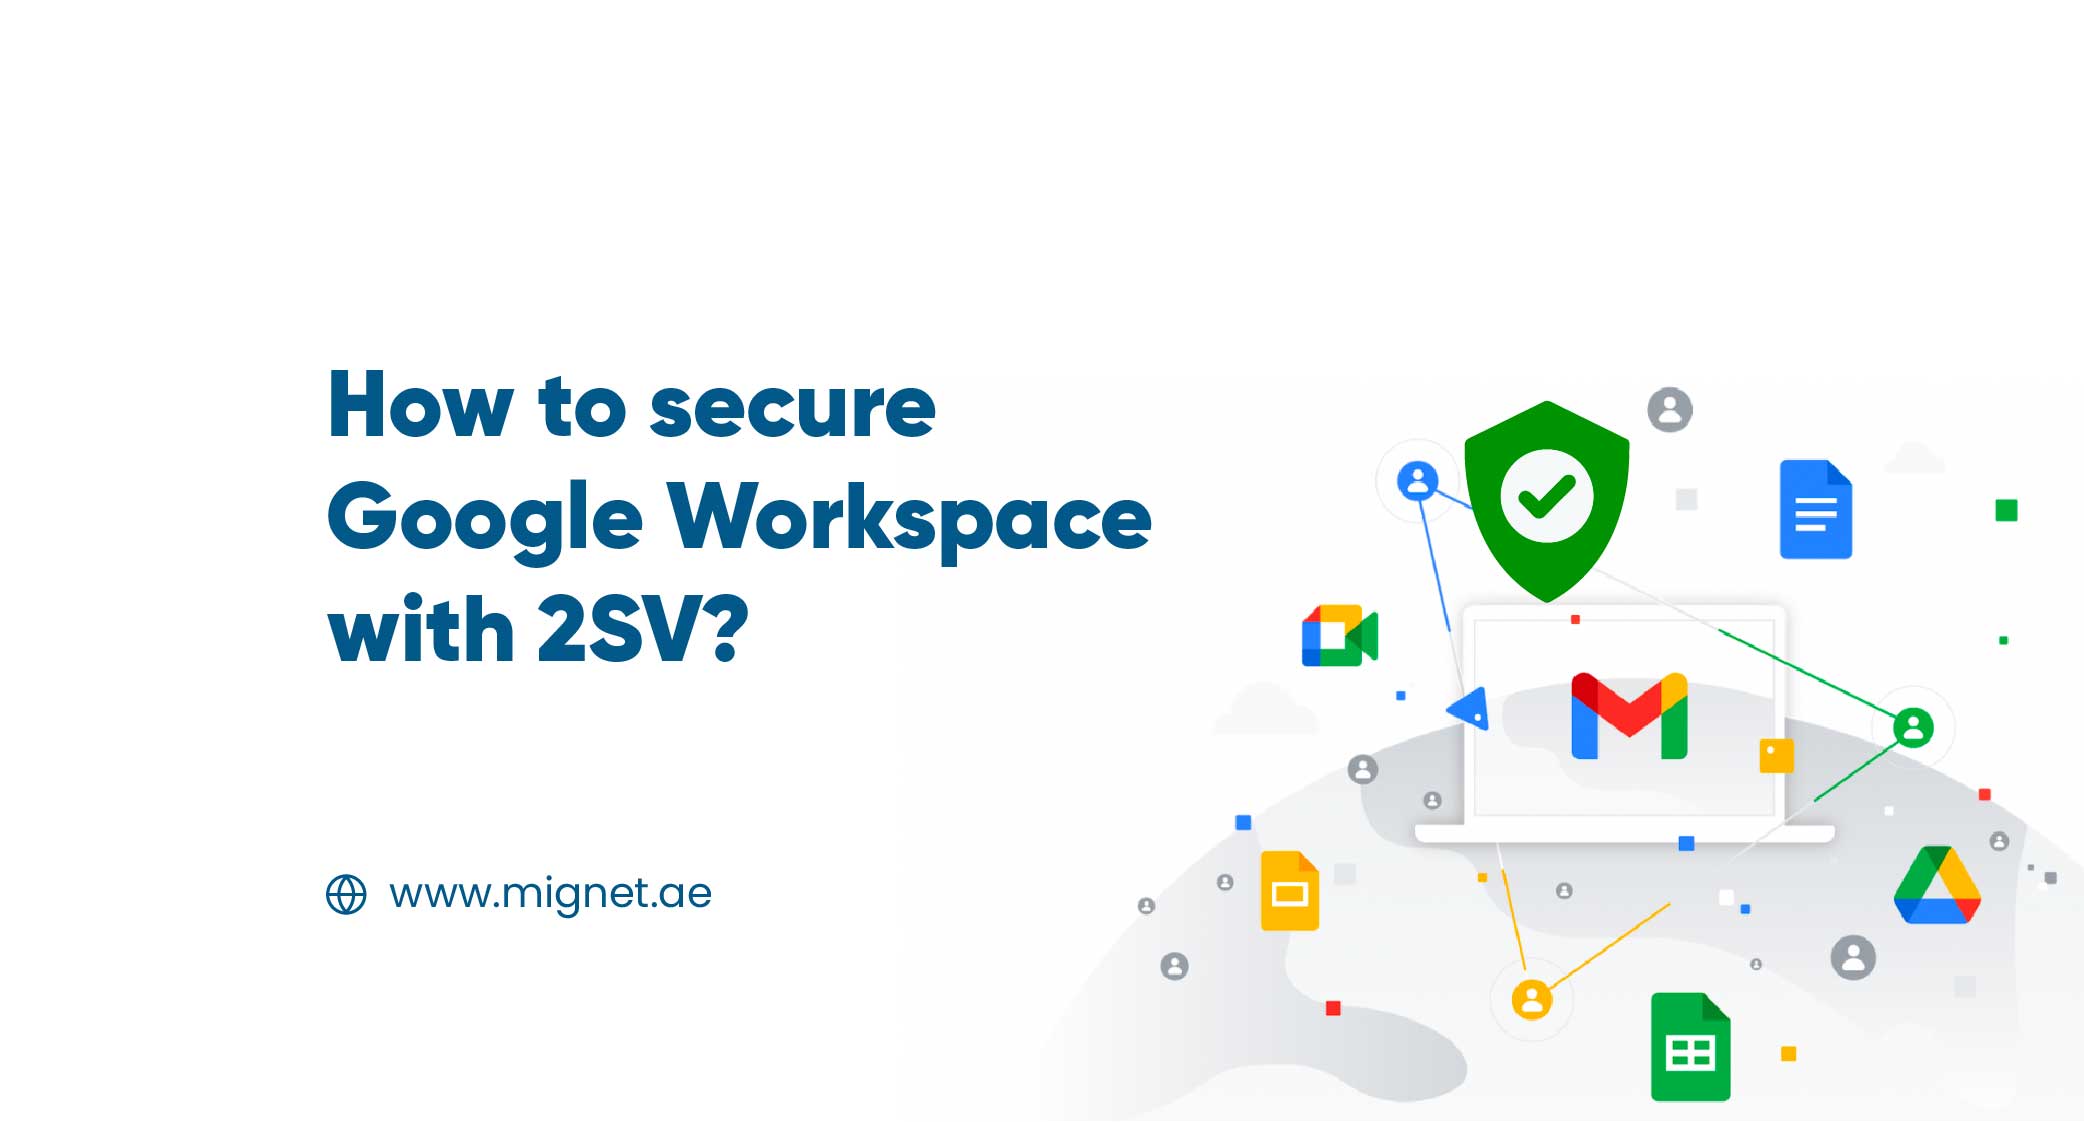 How to secure Google Workspace with 2SV